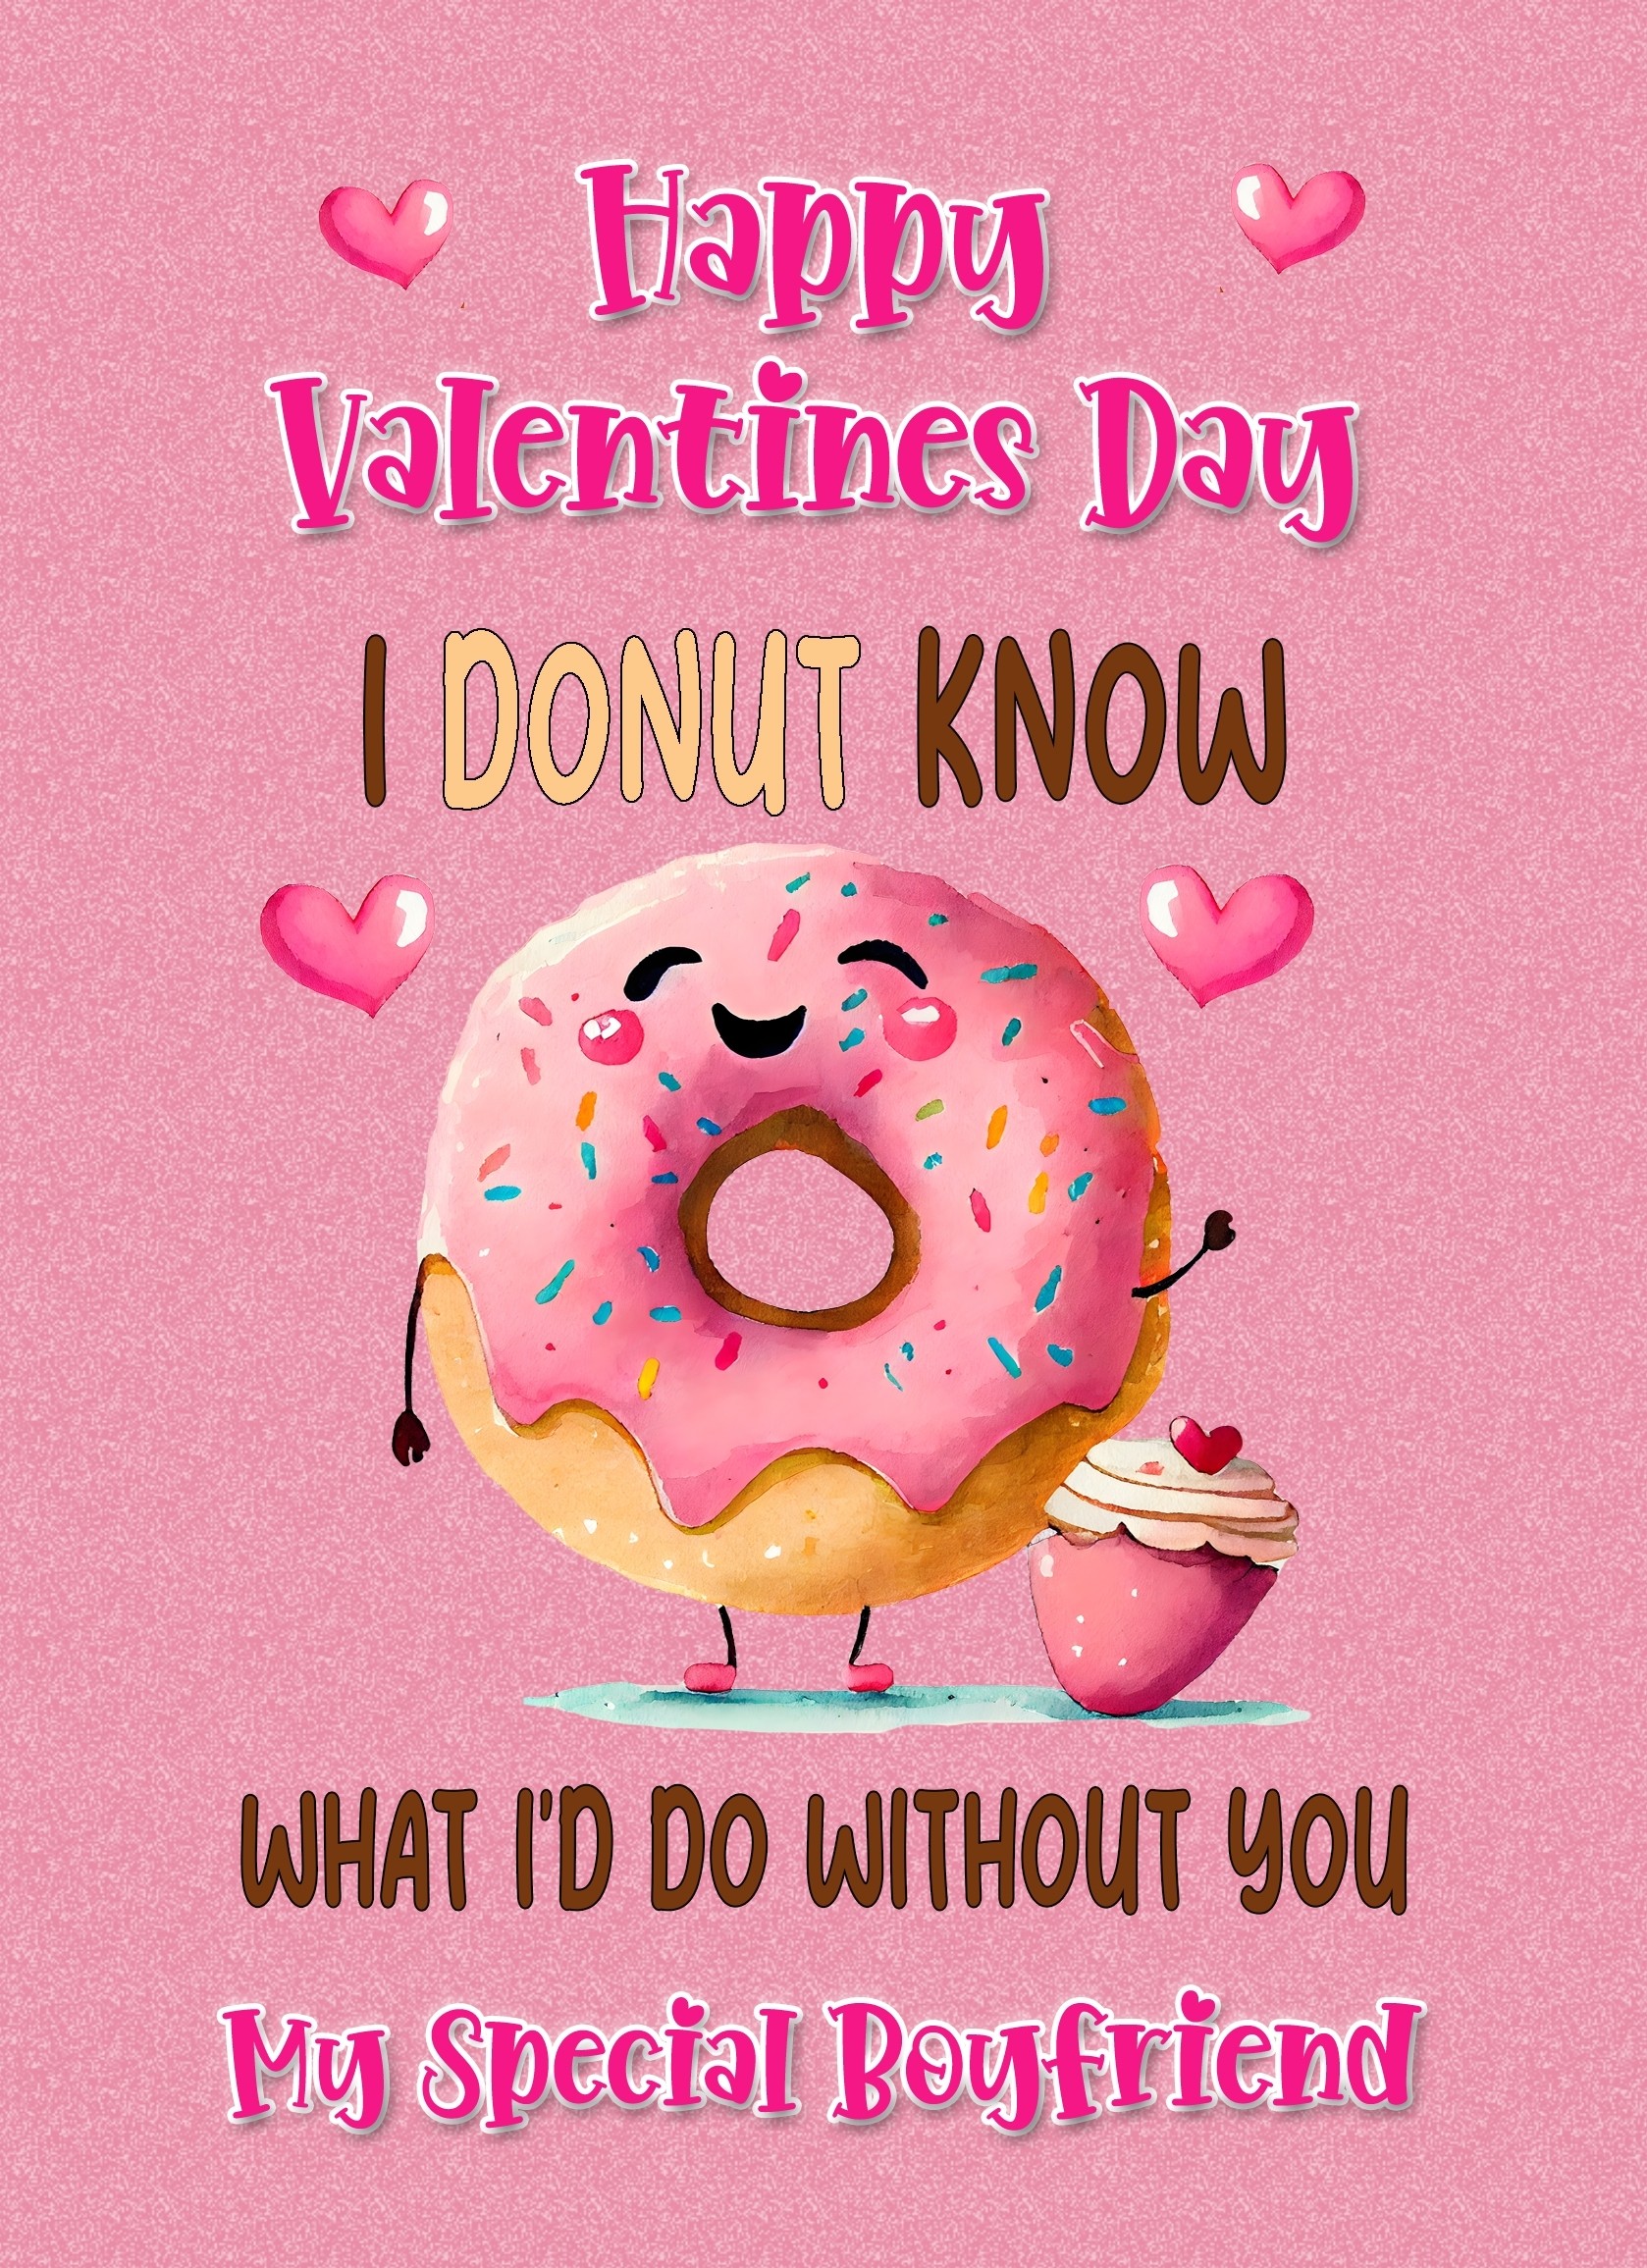 Funny Pun Valentines Day Card for Boyfriend (Donut Know)